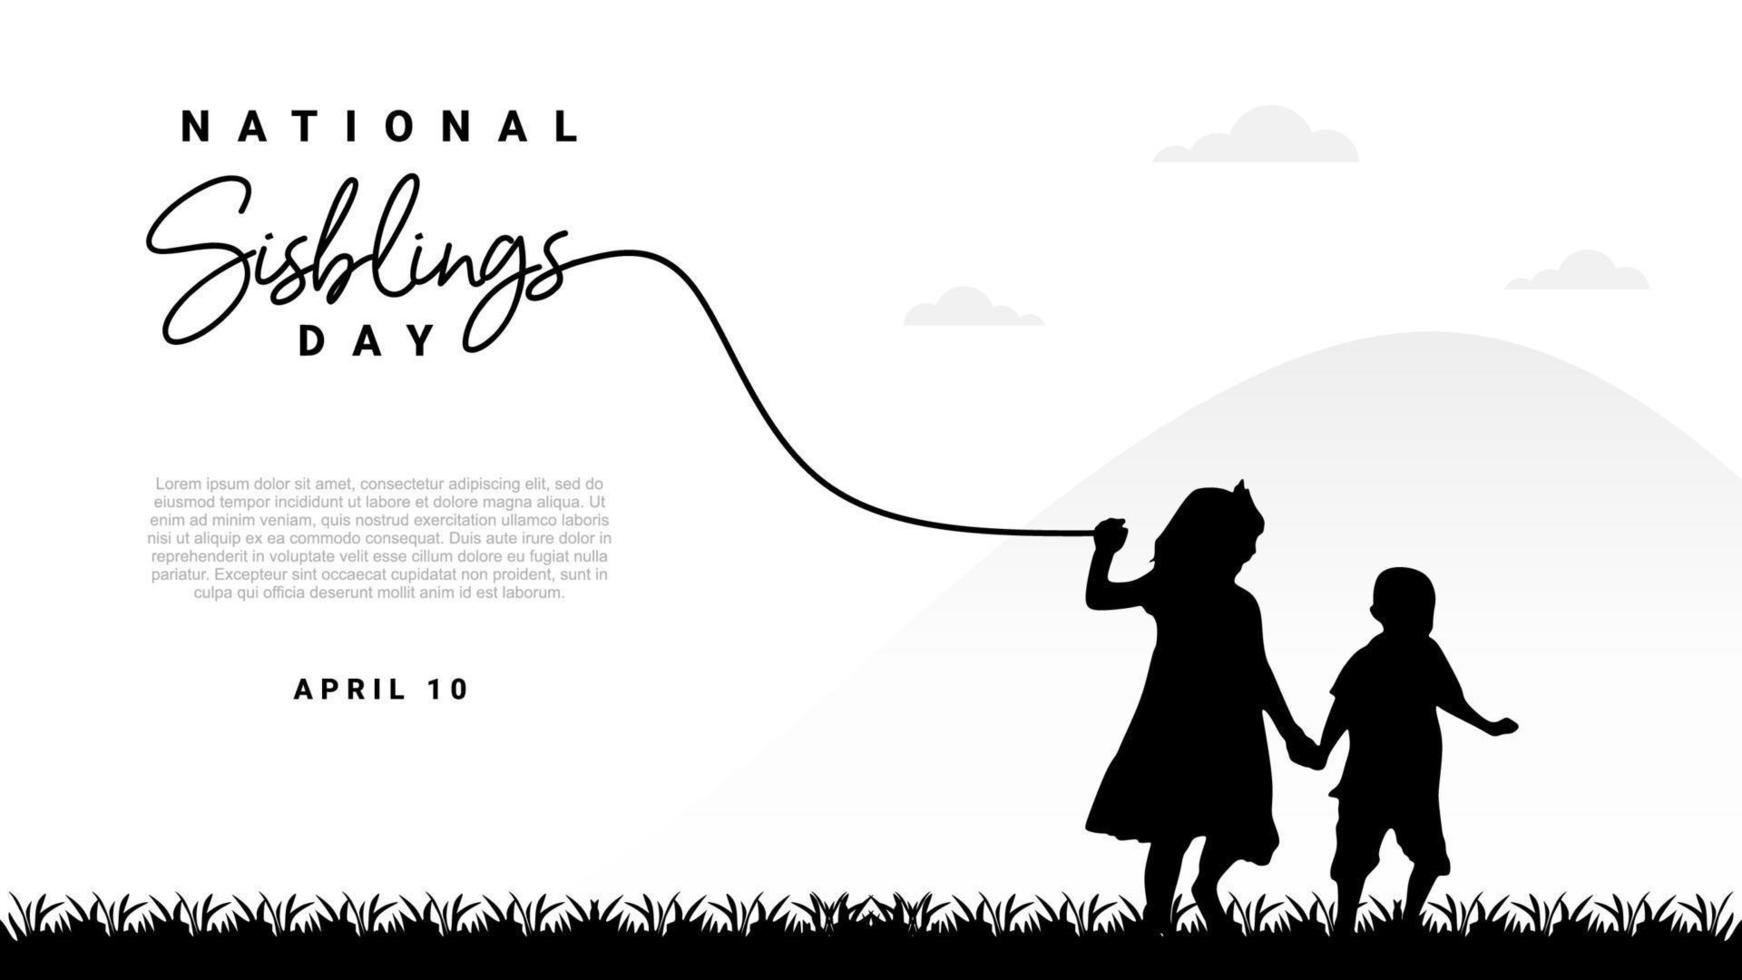 National siblings day banner poster celebrated on april 10. vector